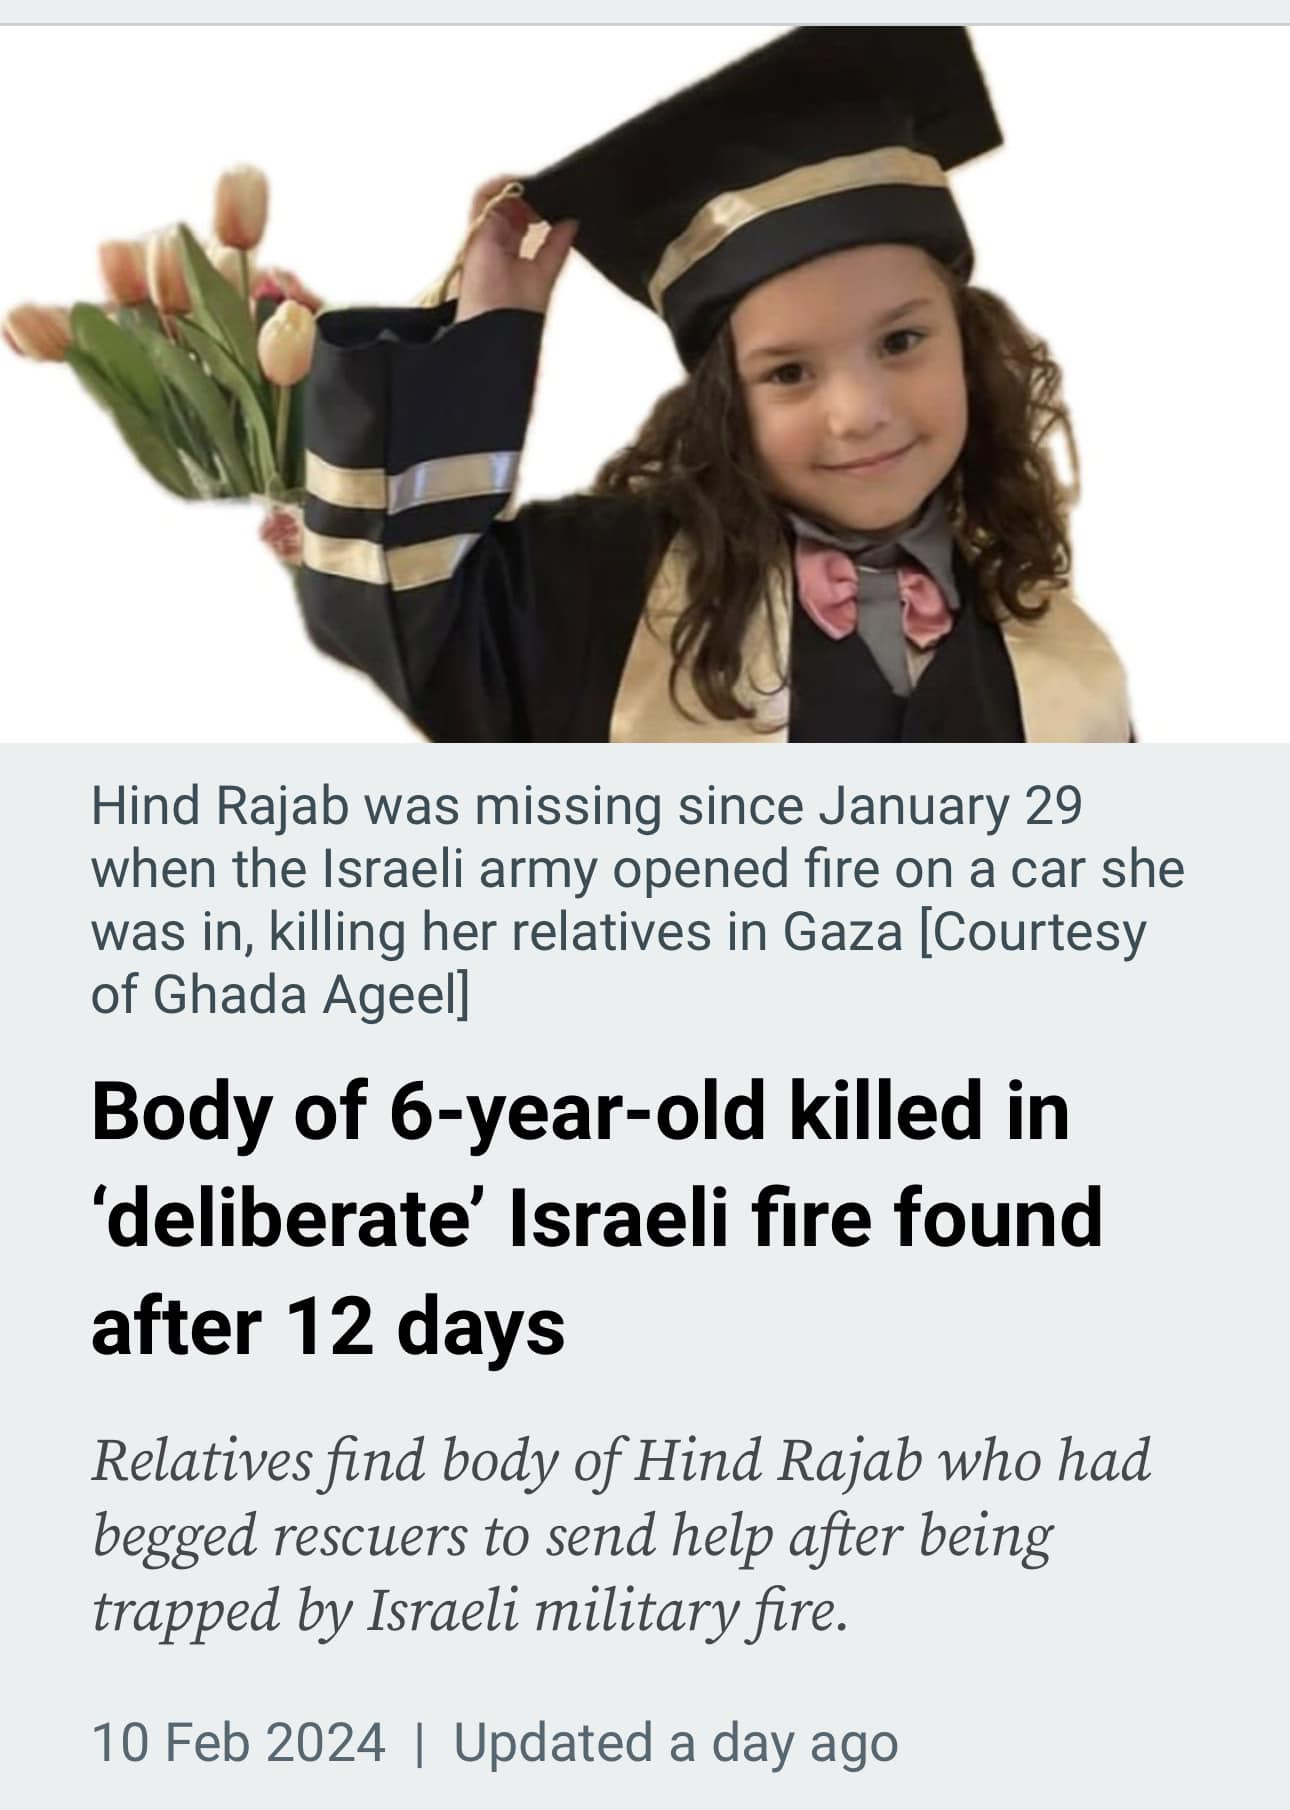 May be an image of 1 person and text that says 'Hind Rajab was missing since January 29 when the Israeli army opened fire on a car she was in, killing her relatives in Gaza [Courtesy of Ghada Ageel] Body of 6-year-old killed in 'deliberate' Israeli fire found after 12 days Relatives find body of Hind Rajab who had begged rescuers to send help after being trapped by Israeli military fire. 10 Feb 2024 Updated a day ago'